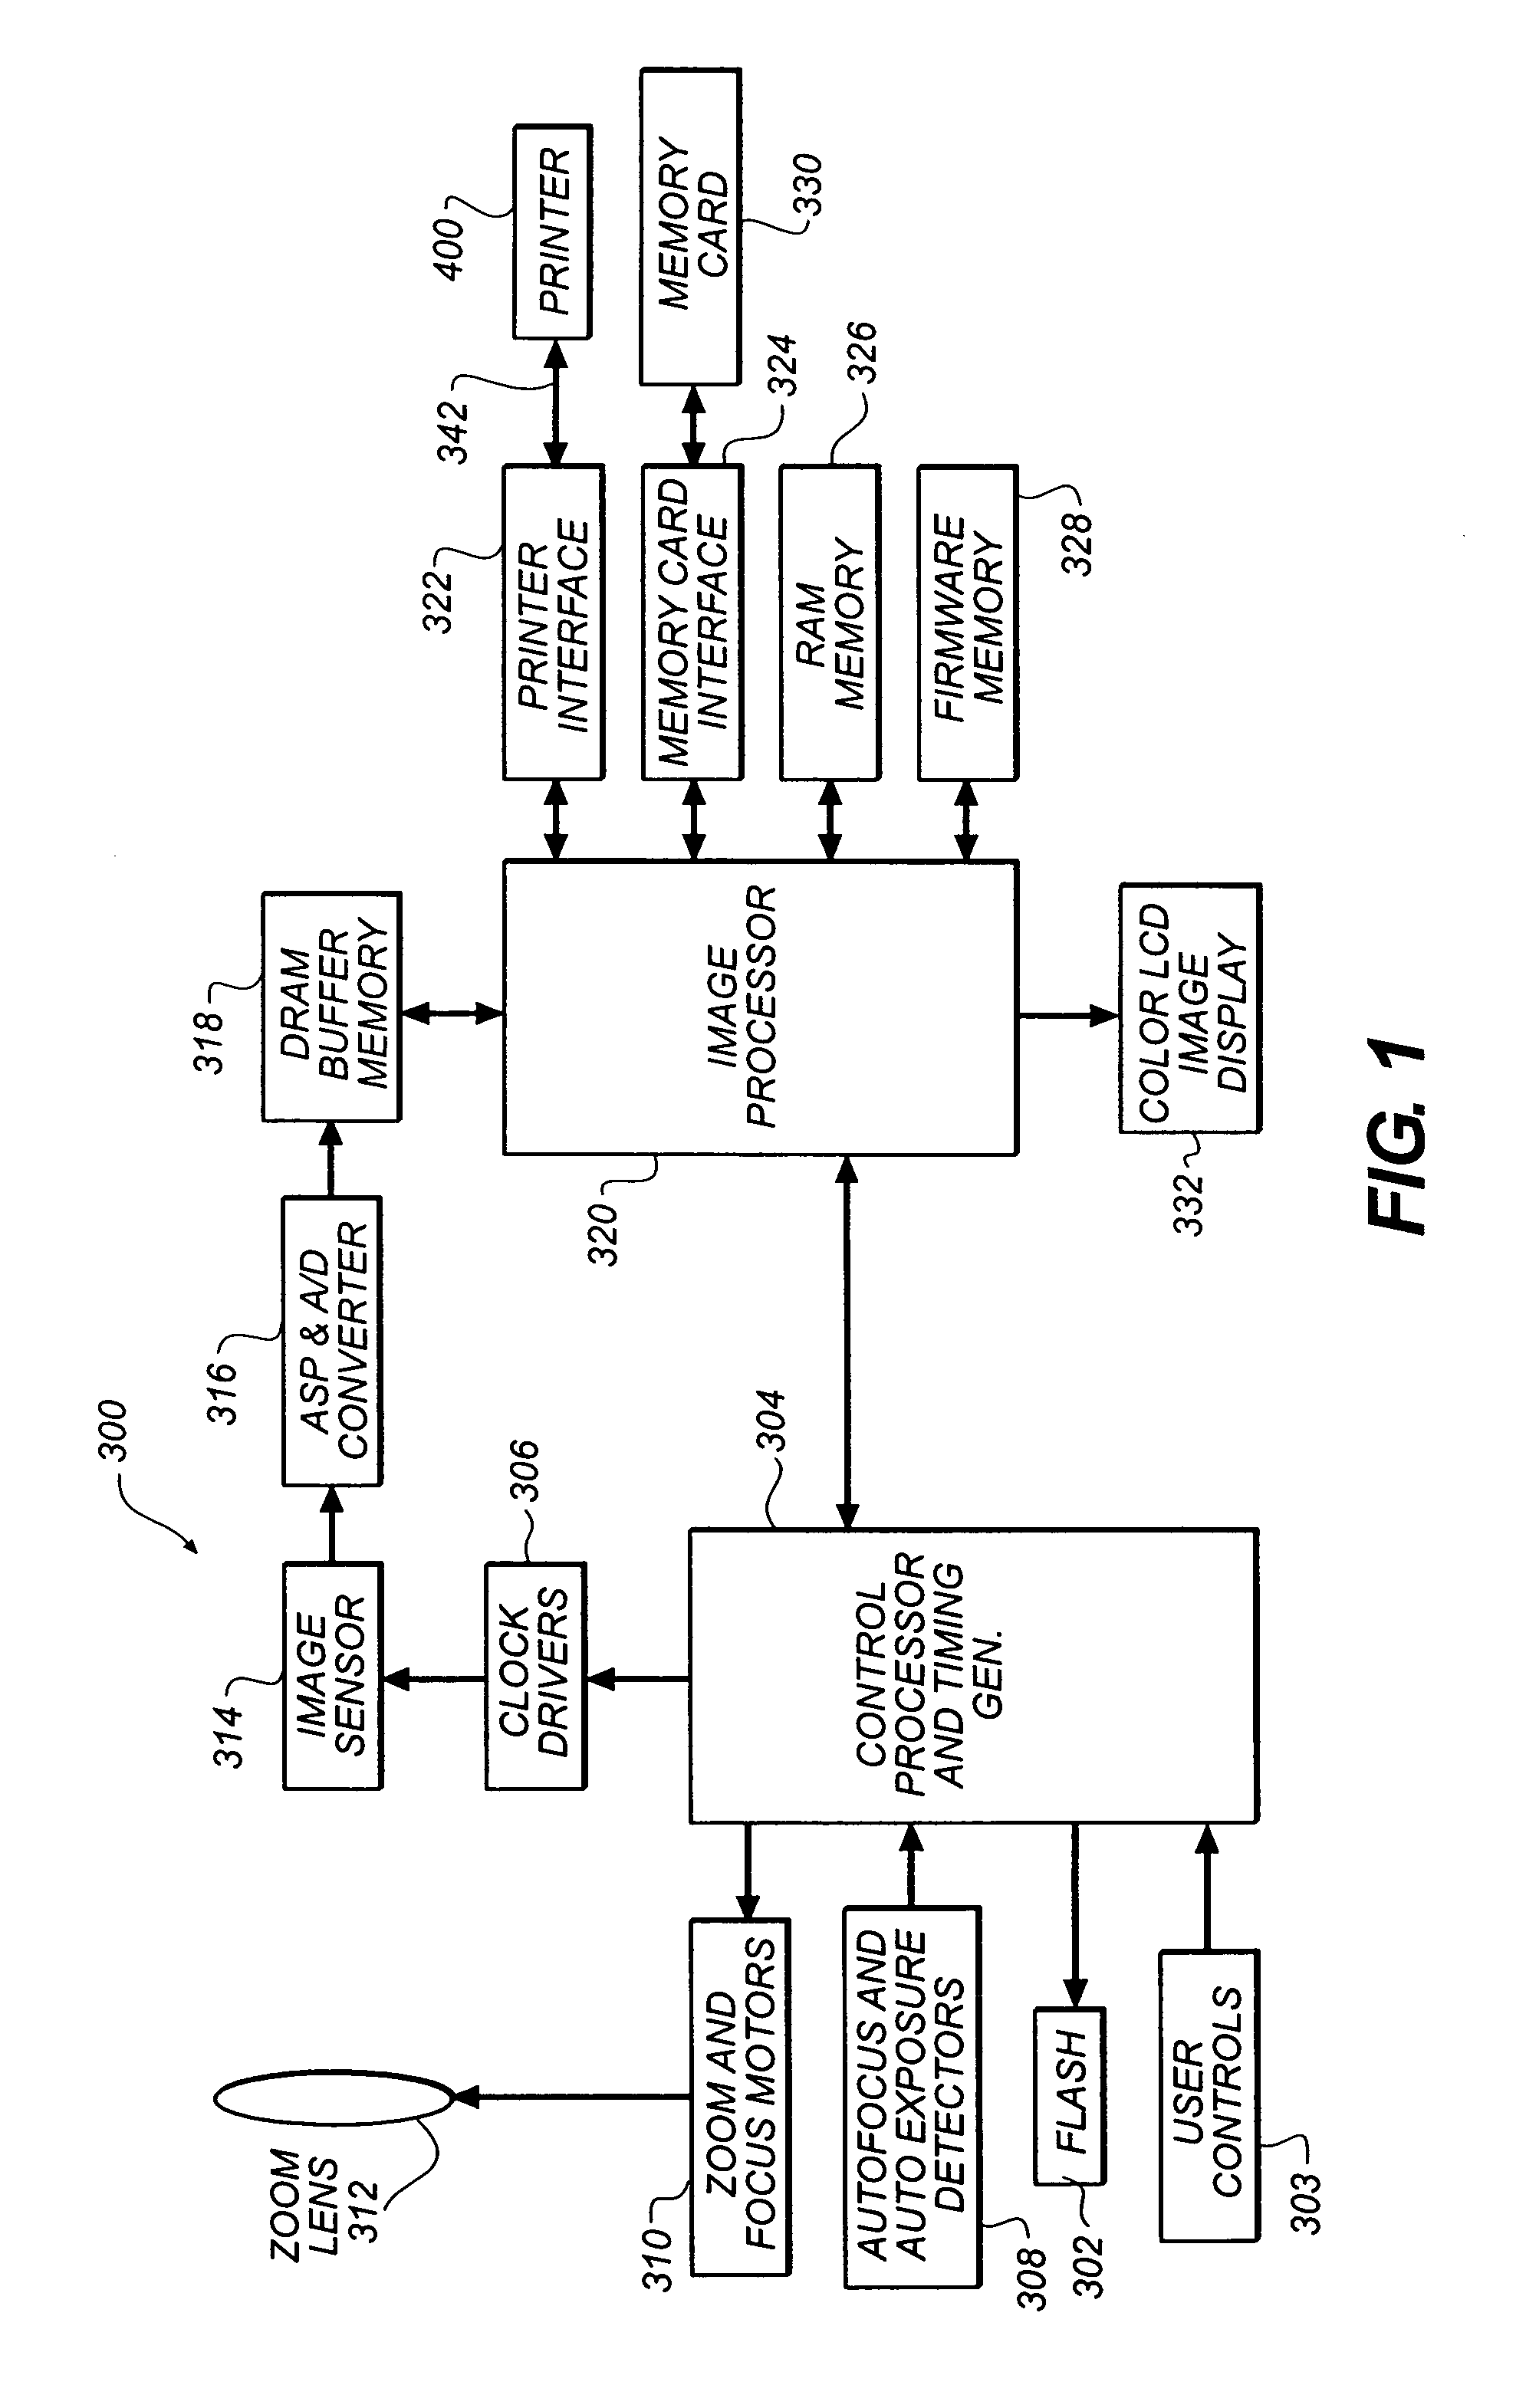 Color digital printer having a graphical user interface for displaying and selecting images for local and remote printing